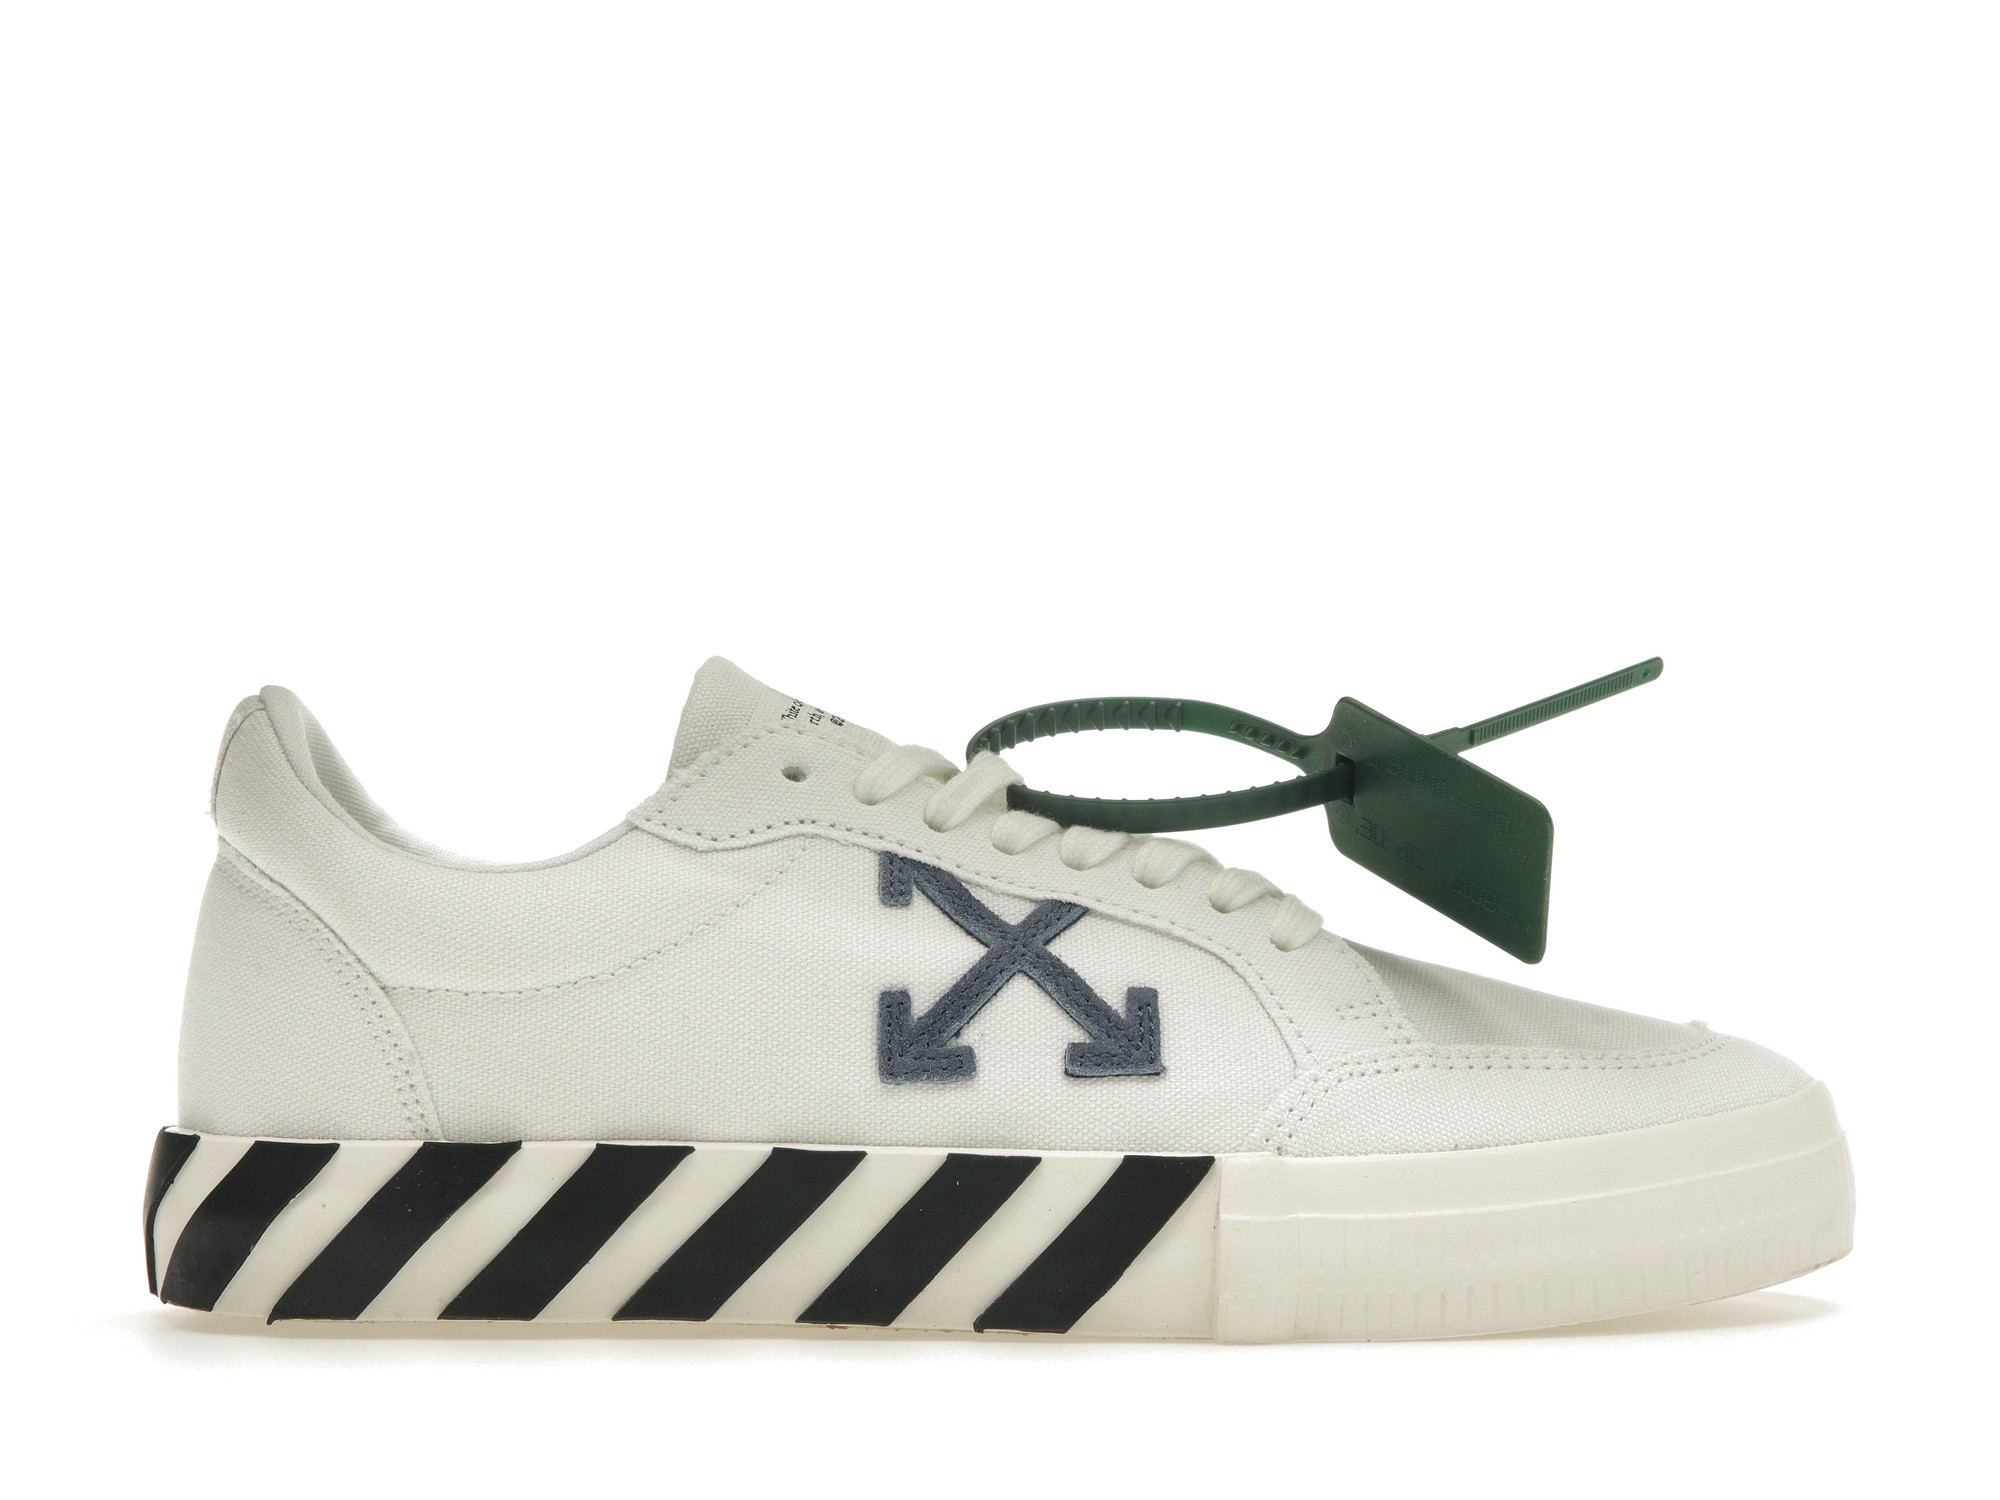 OFF-WHITE Odsy-1000 White Green (Women's) - OWIA180S22FAB0010155 - US